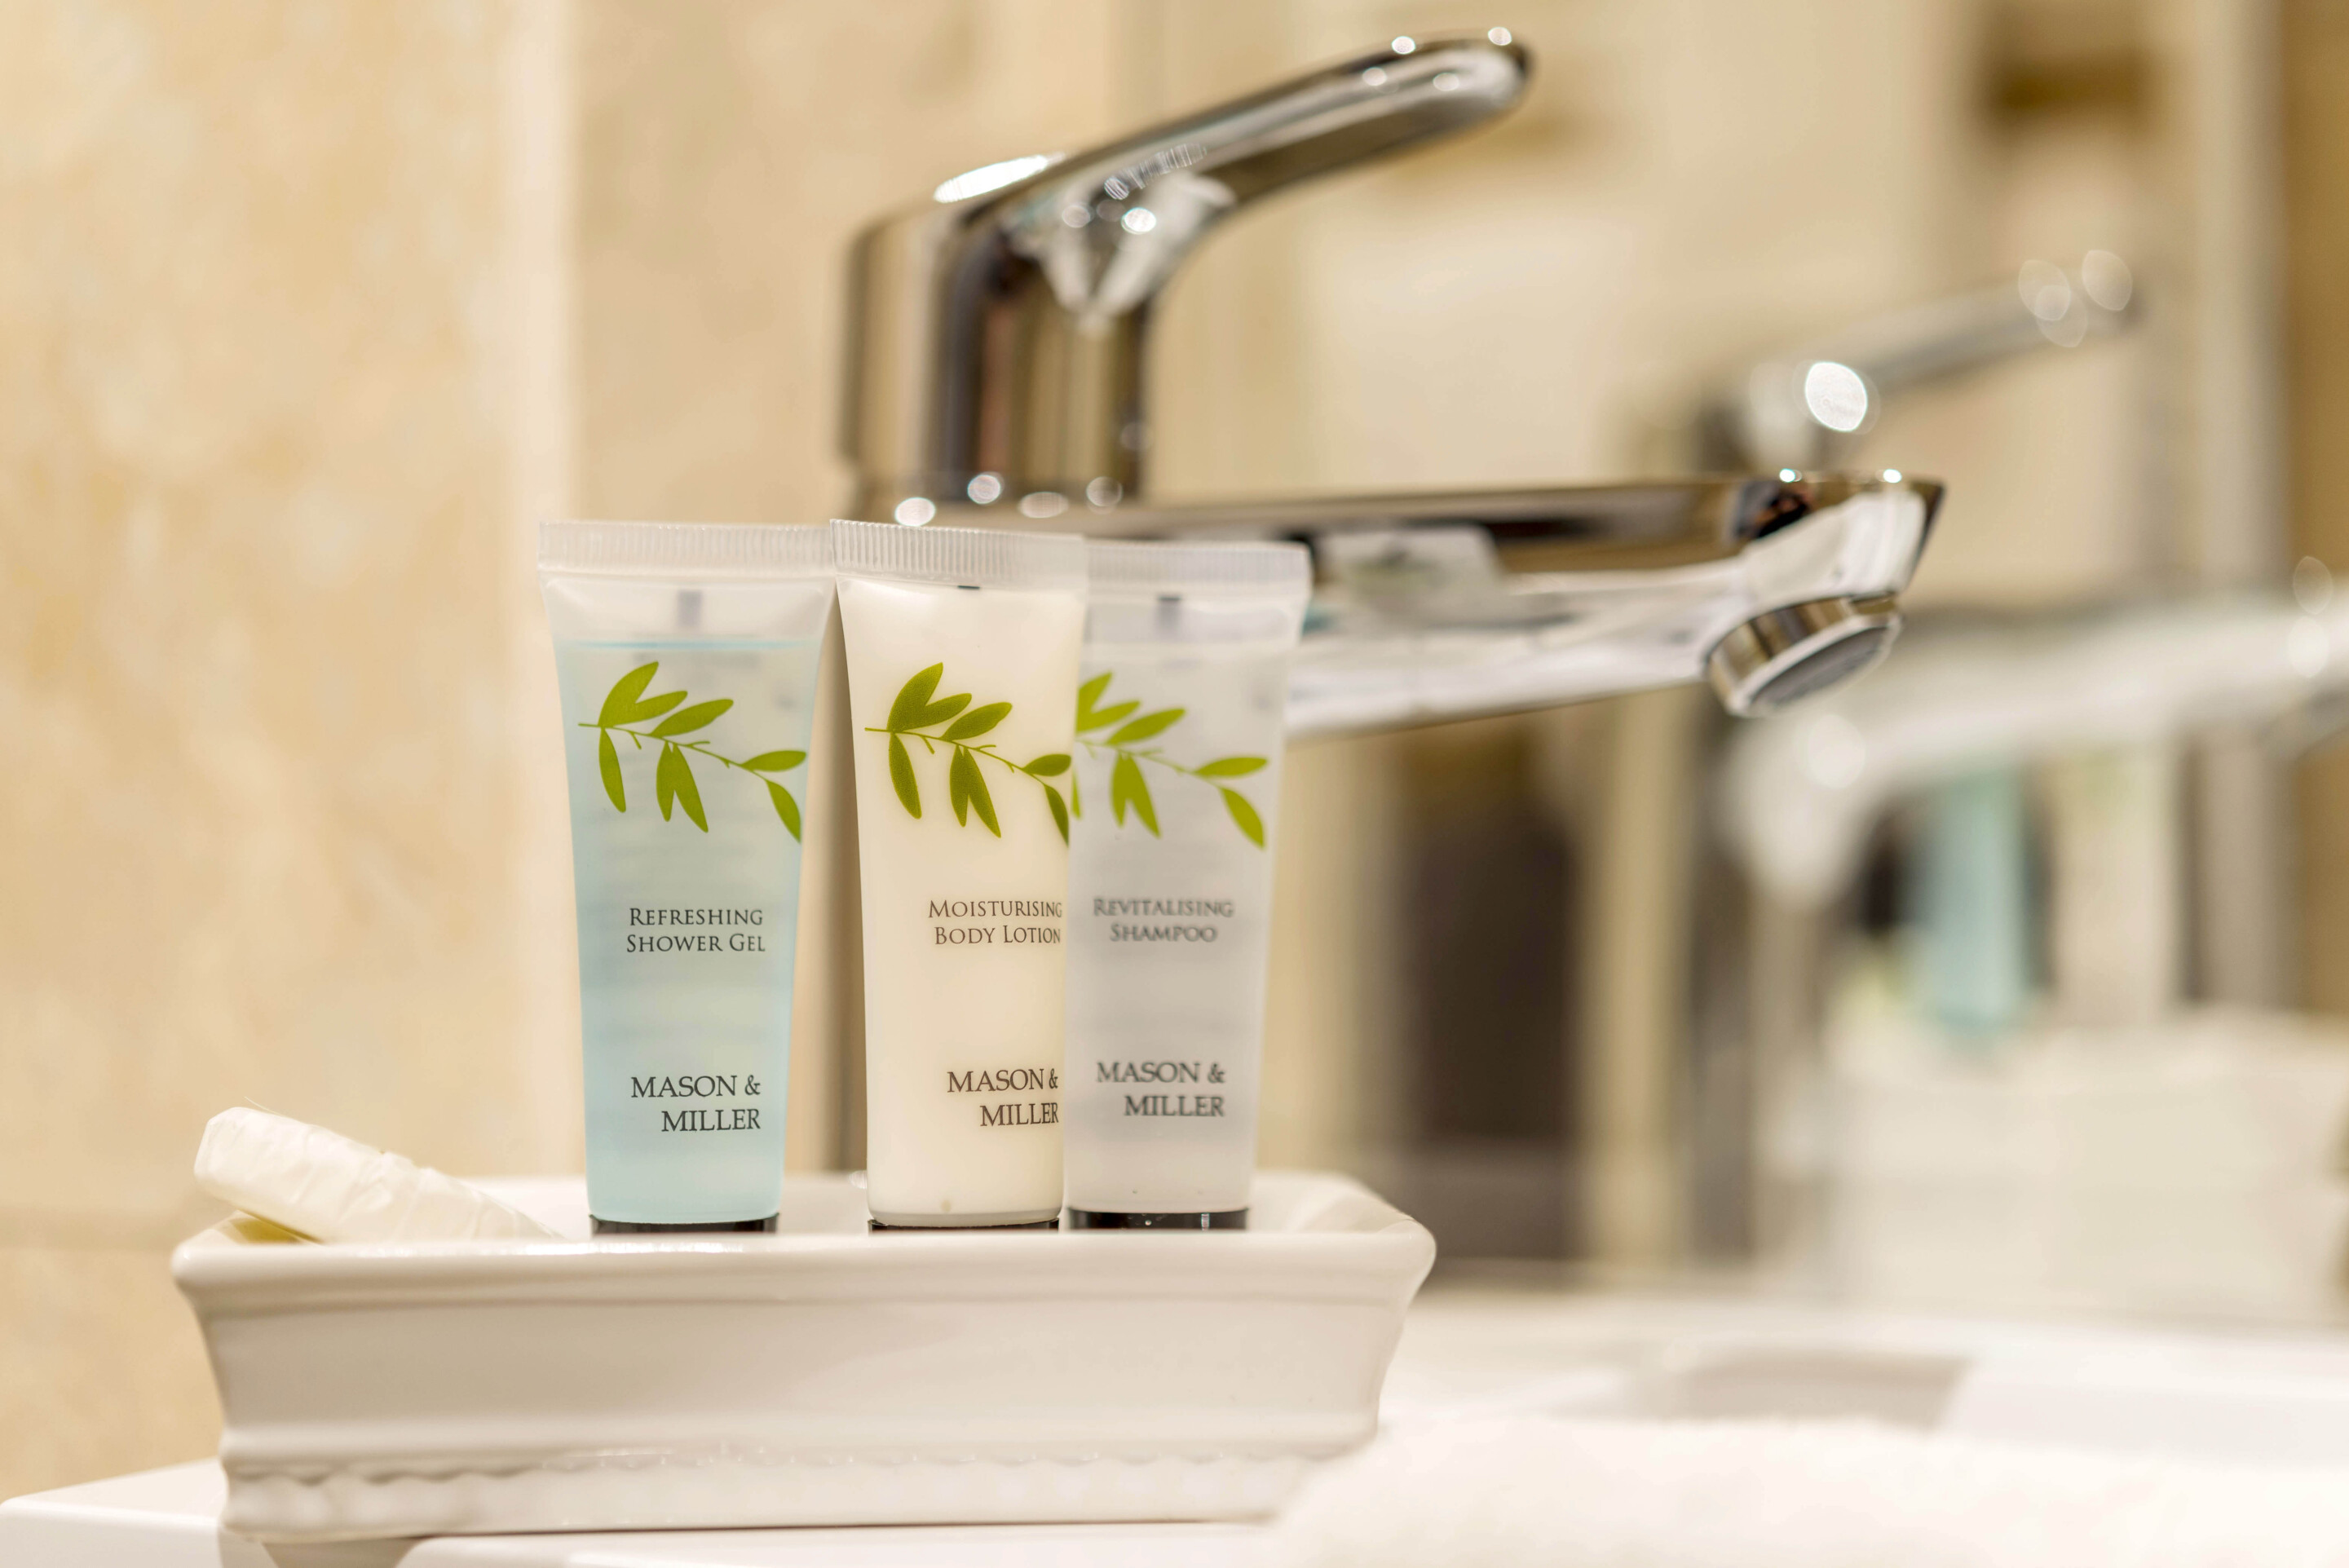 Complimentary Soap, Shampoo and Body Lotion